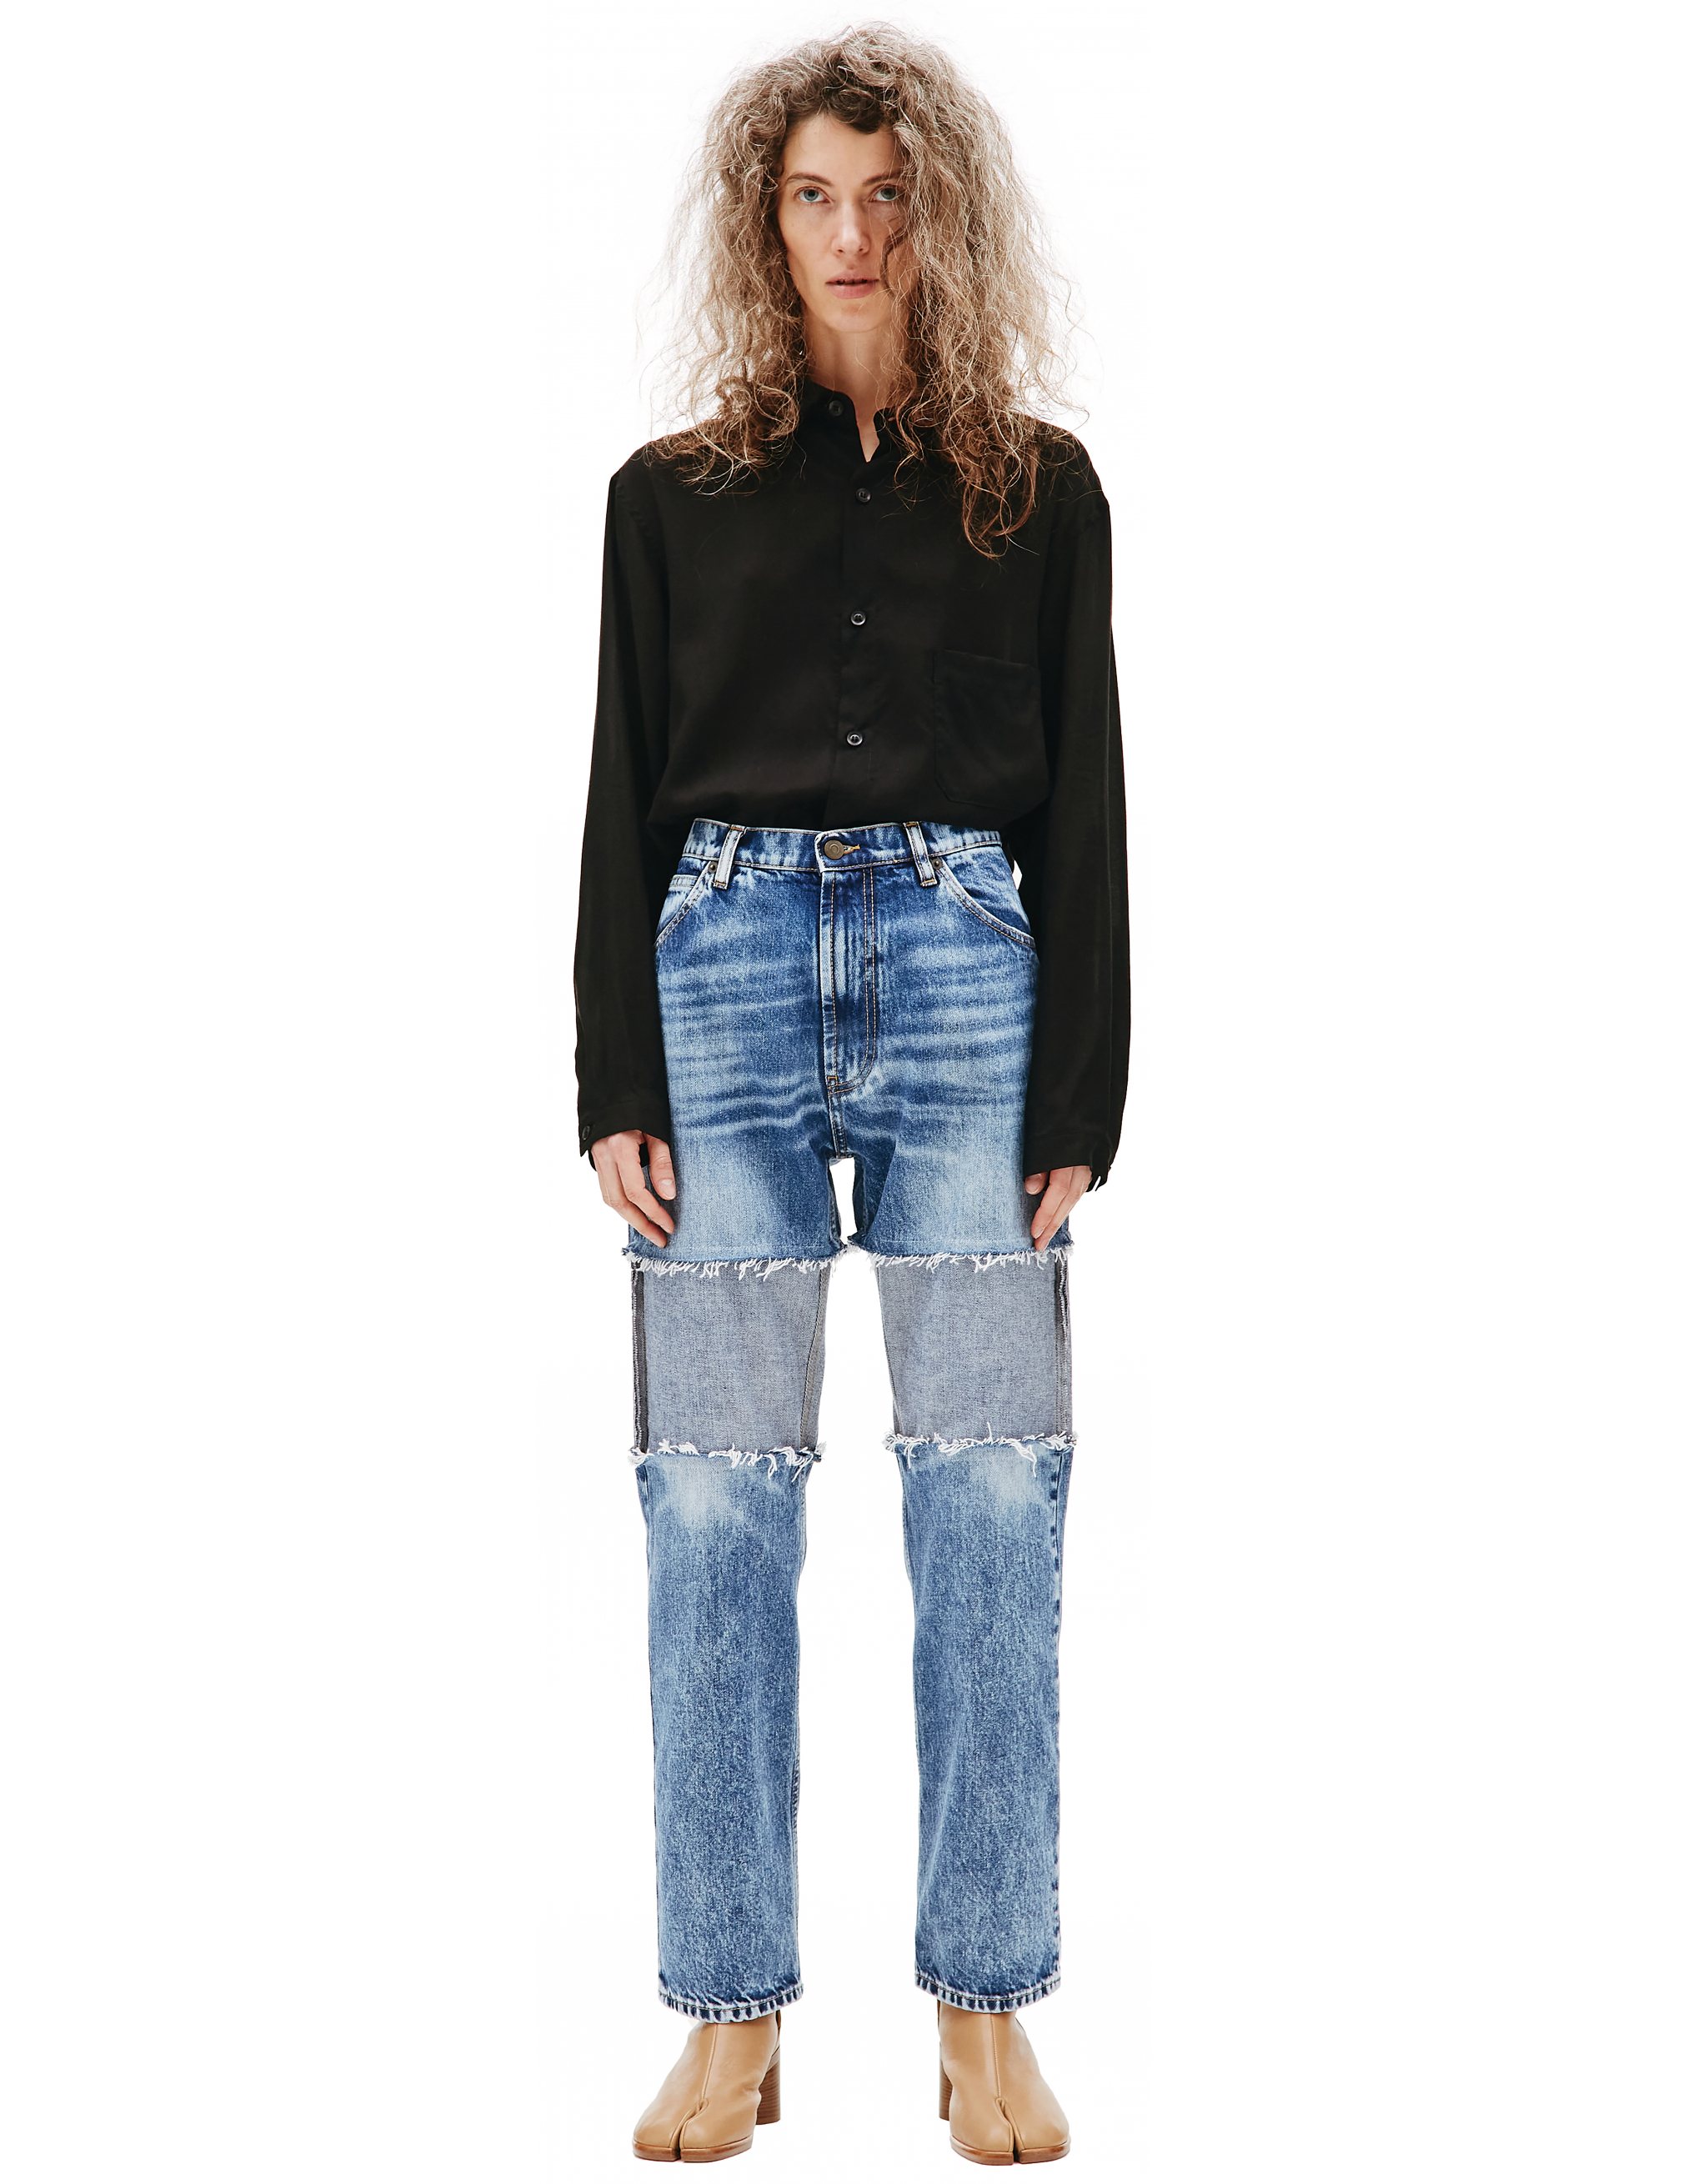 Rabbit b reconstructed Jeans. 650 52